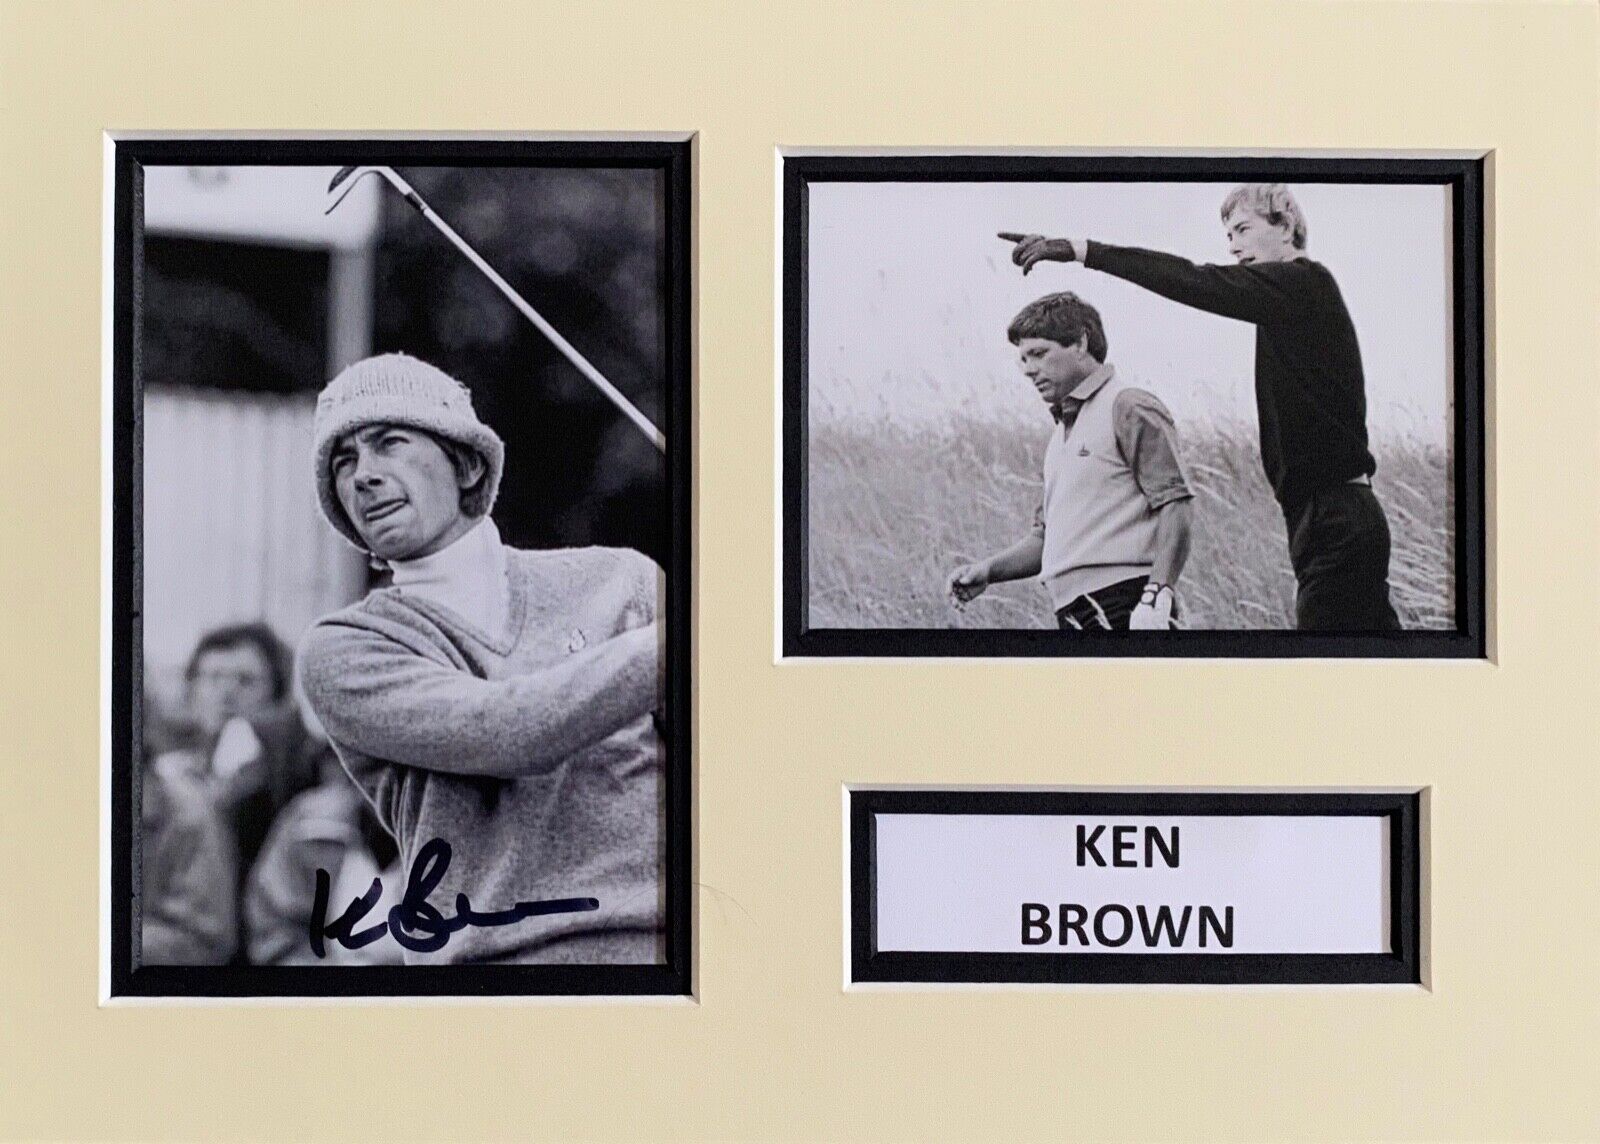 KEN BROWN HAND SIGNED A4 Photo Poster painting MOUNT DISPLAY GOLF AUTOGRAPH 1